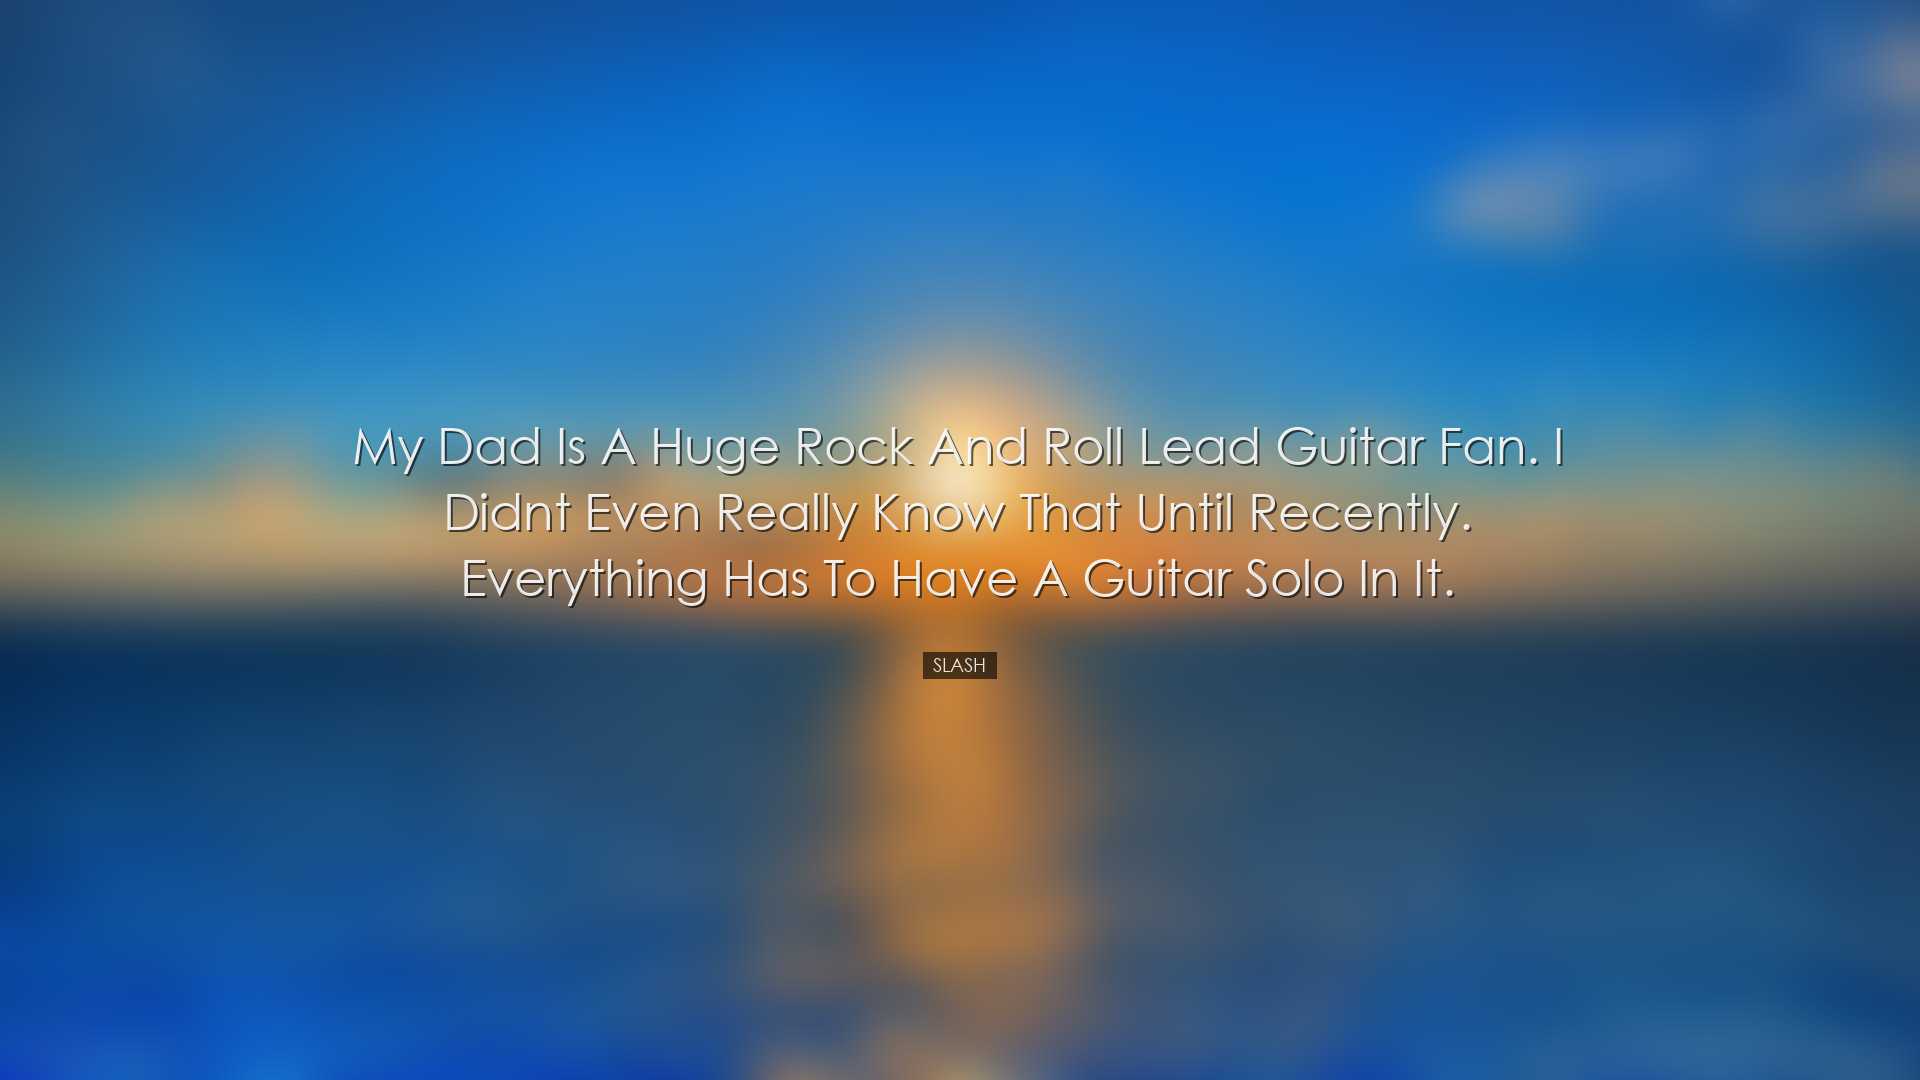 My dad is a huge rock and roll lead guitar fan. I didnt even reall